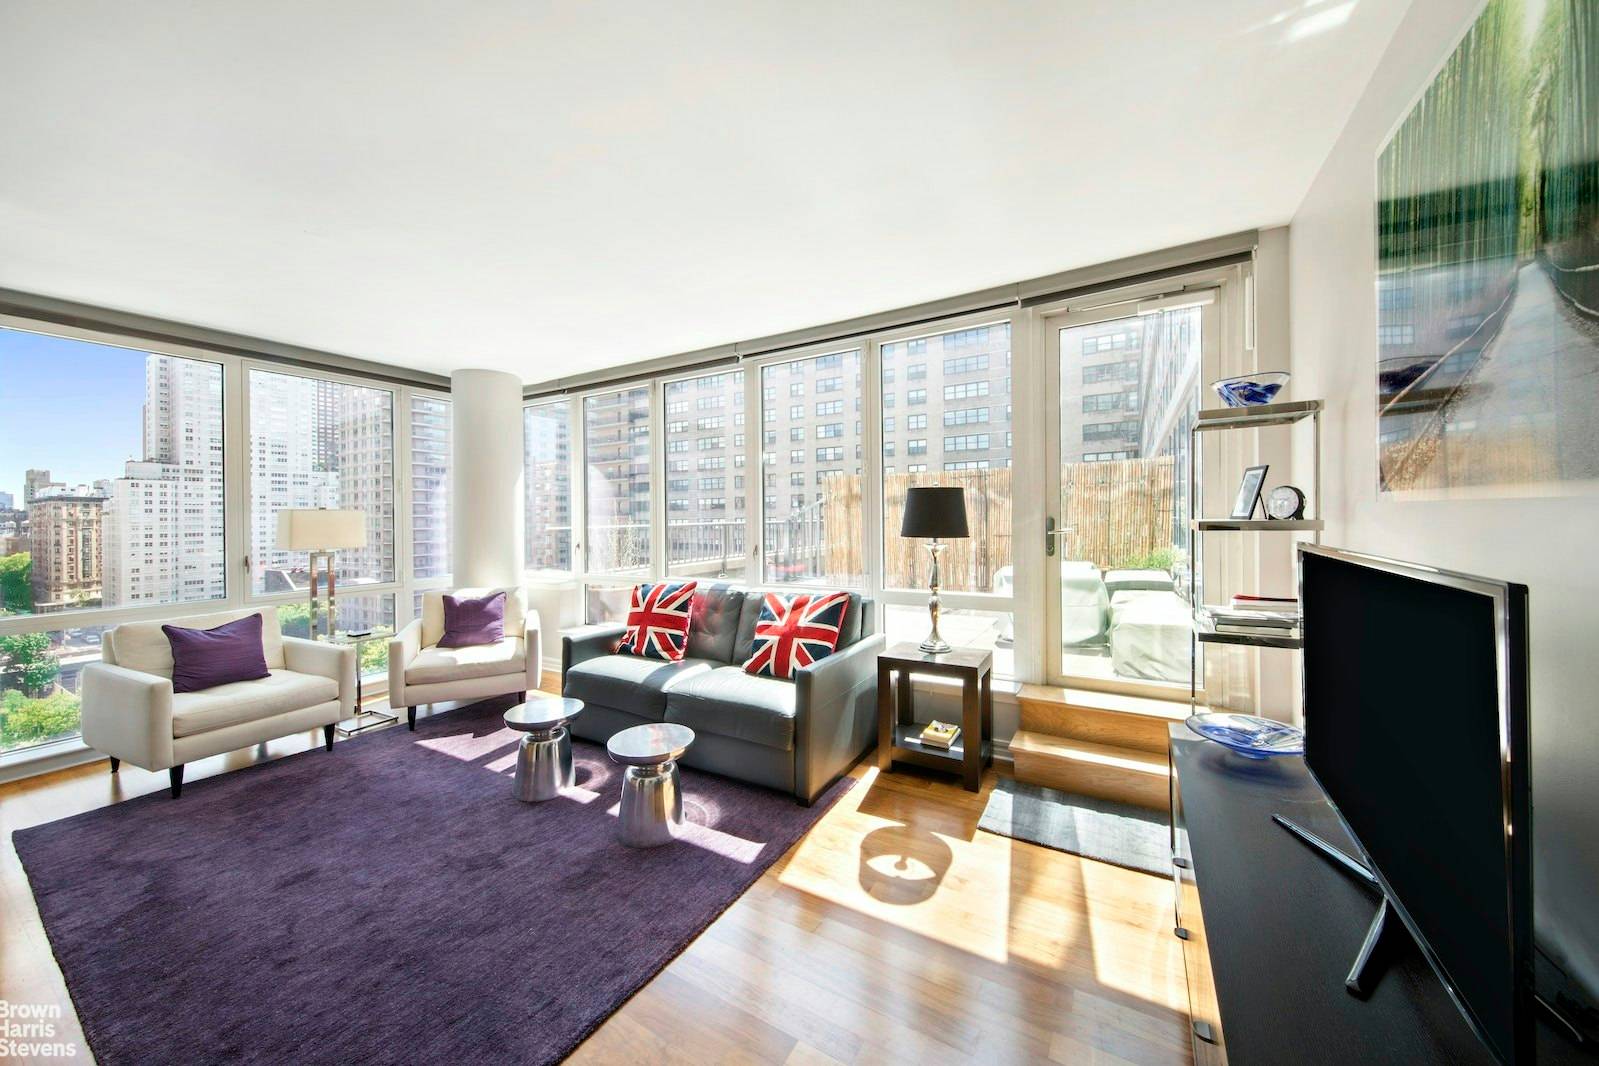 Situated high on the 15th floor in one of the most desirable buildings on the Upper West Side, this unique corner 1 bedroom, 1.